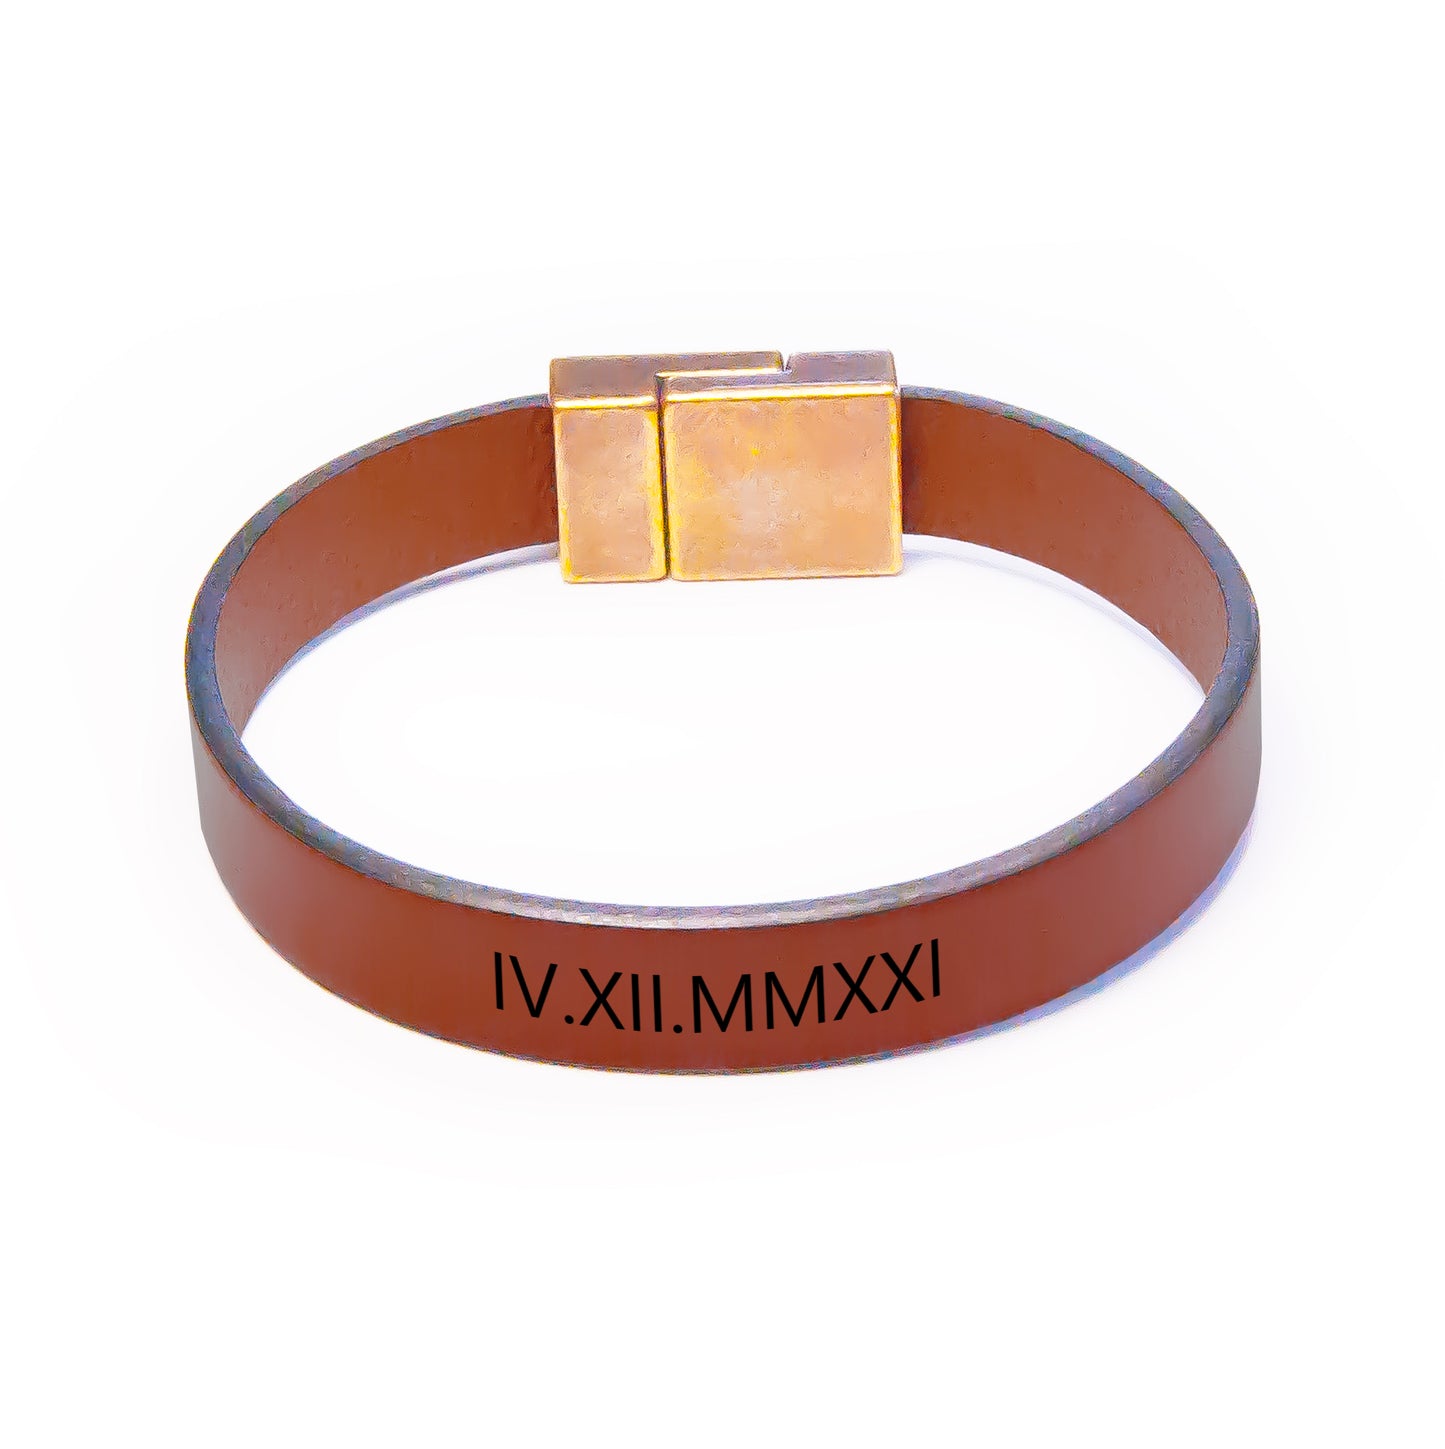 Brown Leather Bracelet Personalized with Hidden Message - Gift for Boyfriend or Girlfriend